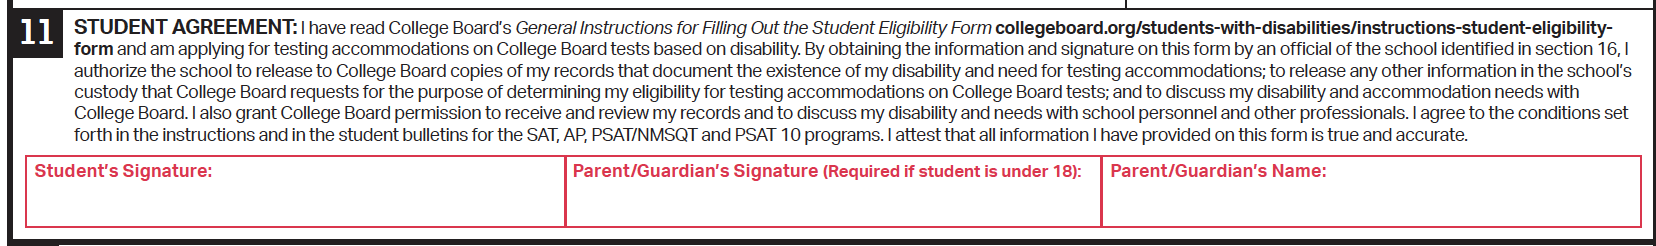 A screenshot of section 11, the signature portion, on the paper Student Eligibility Form